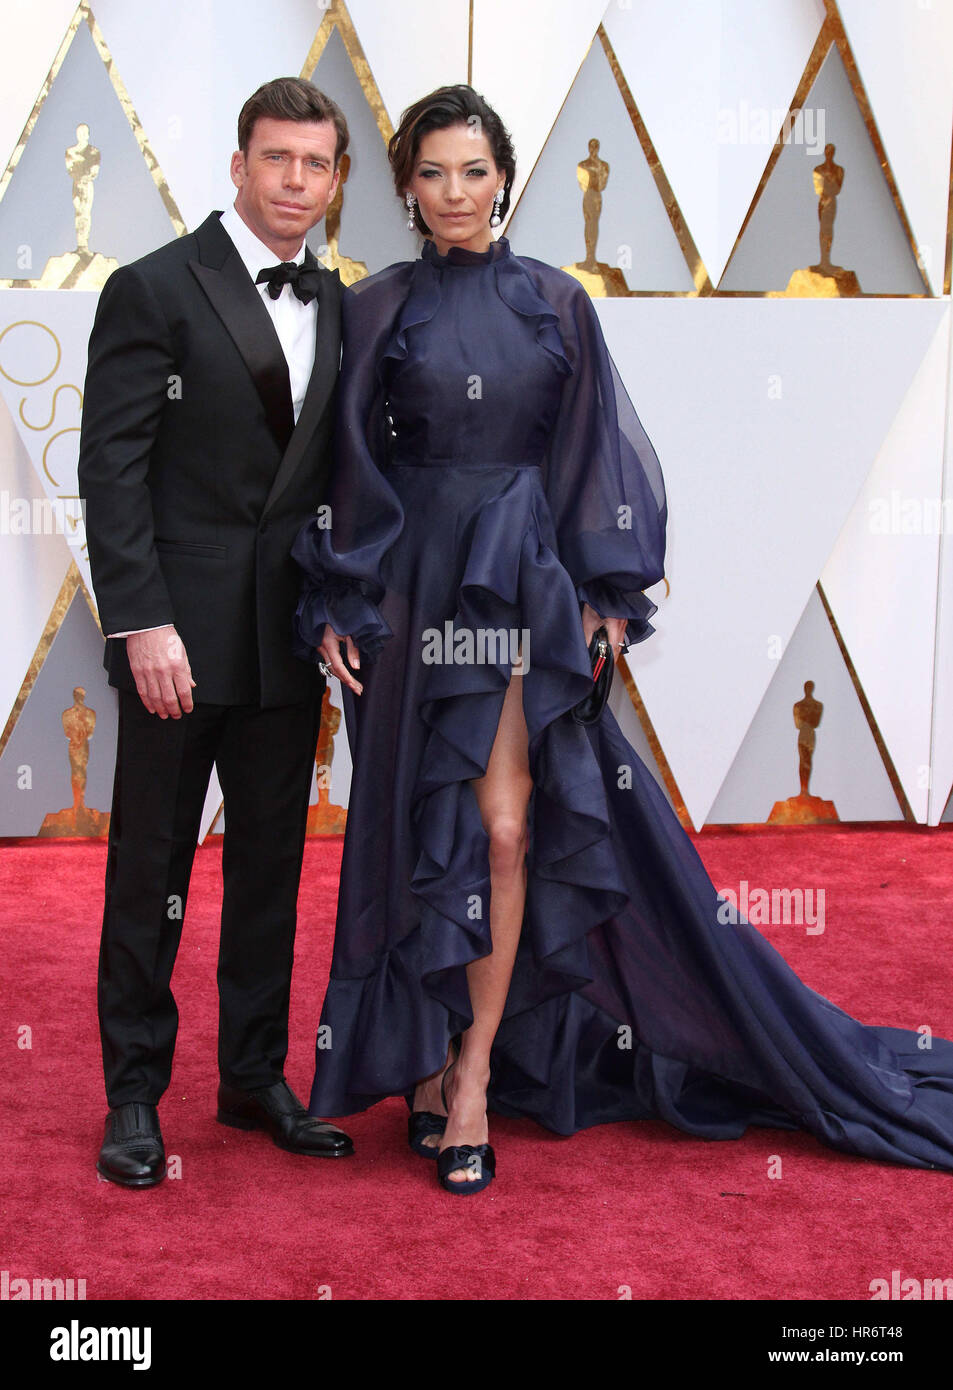 Hollywood, USA. 26th Feb, 2017. Taylor Sheridan, Nicole Sheridan. 89th Annual Academy Awards presented by the Academy of Motion Picture Arts and Sciences held at Hollywood & Highland Center. Credit: AdMedia/ZUMA Wire/Alamy Live News Stock Photo